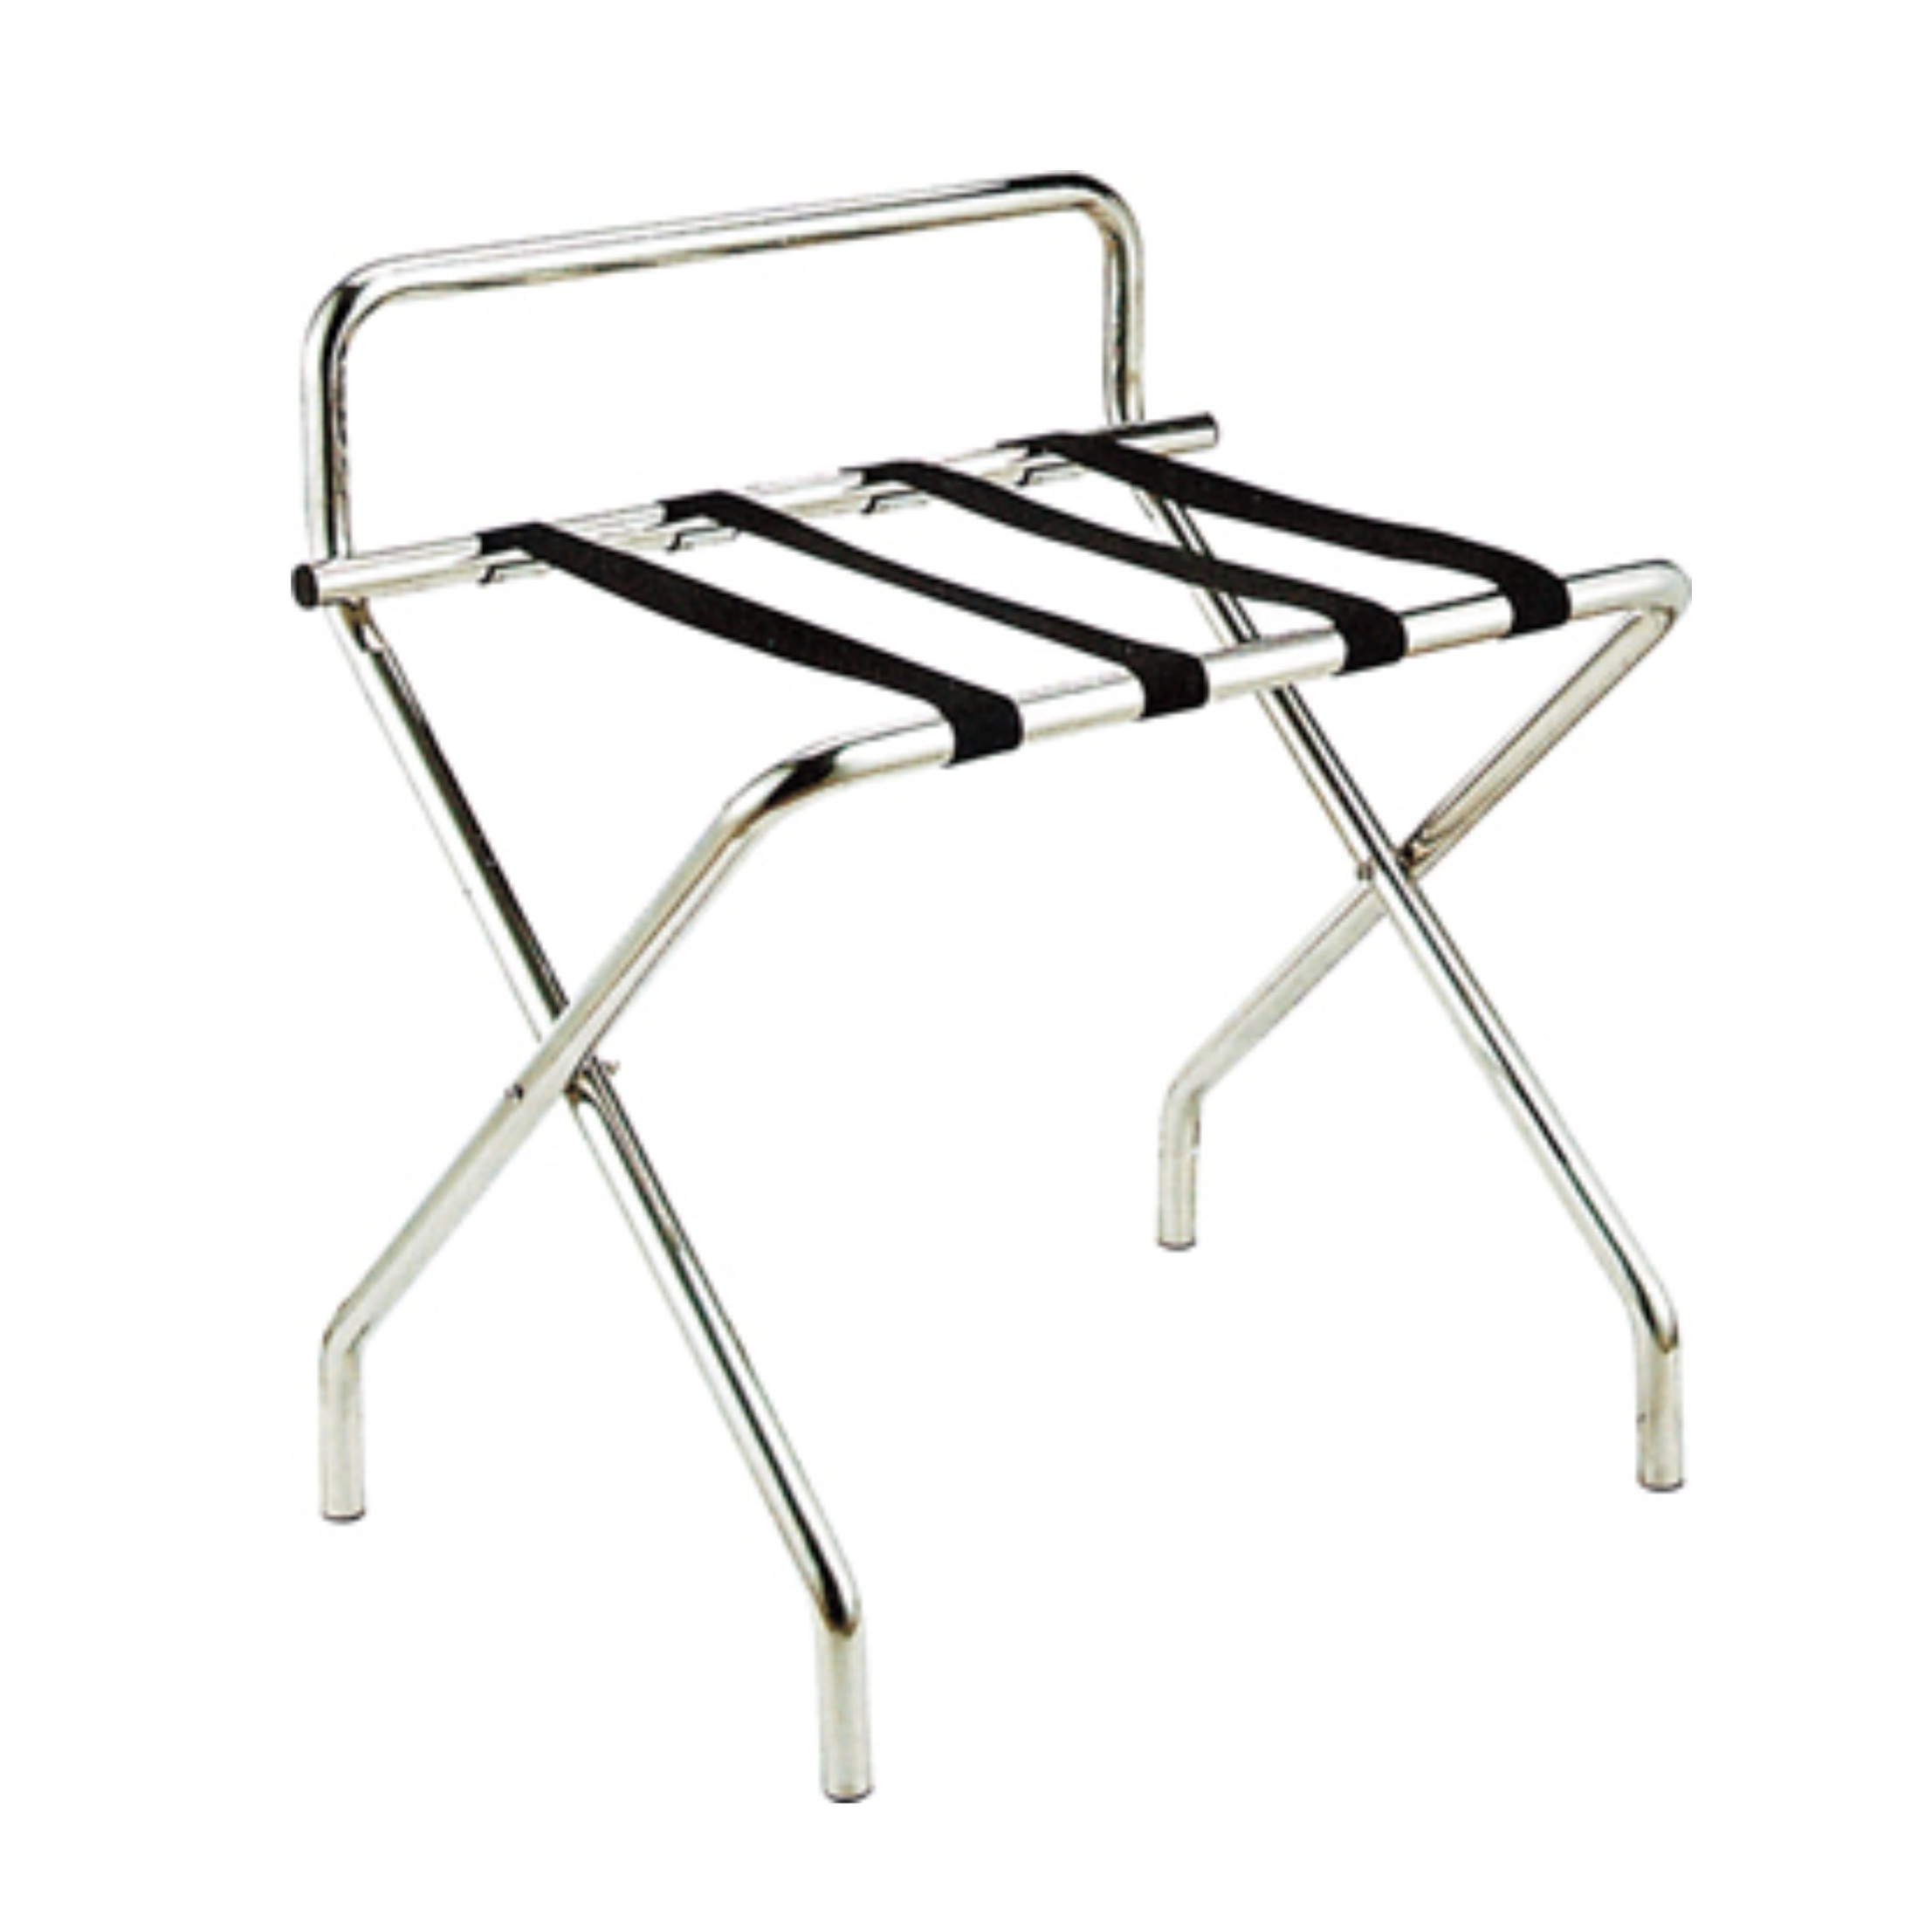 Luggage Rack with Stainless Steel for Guestroom (CJ-15B)